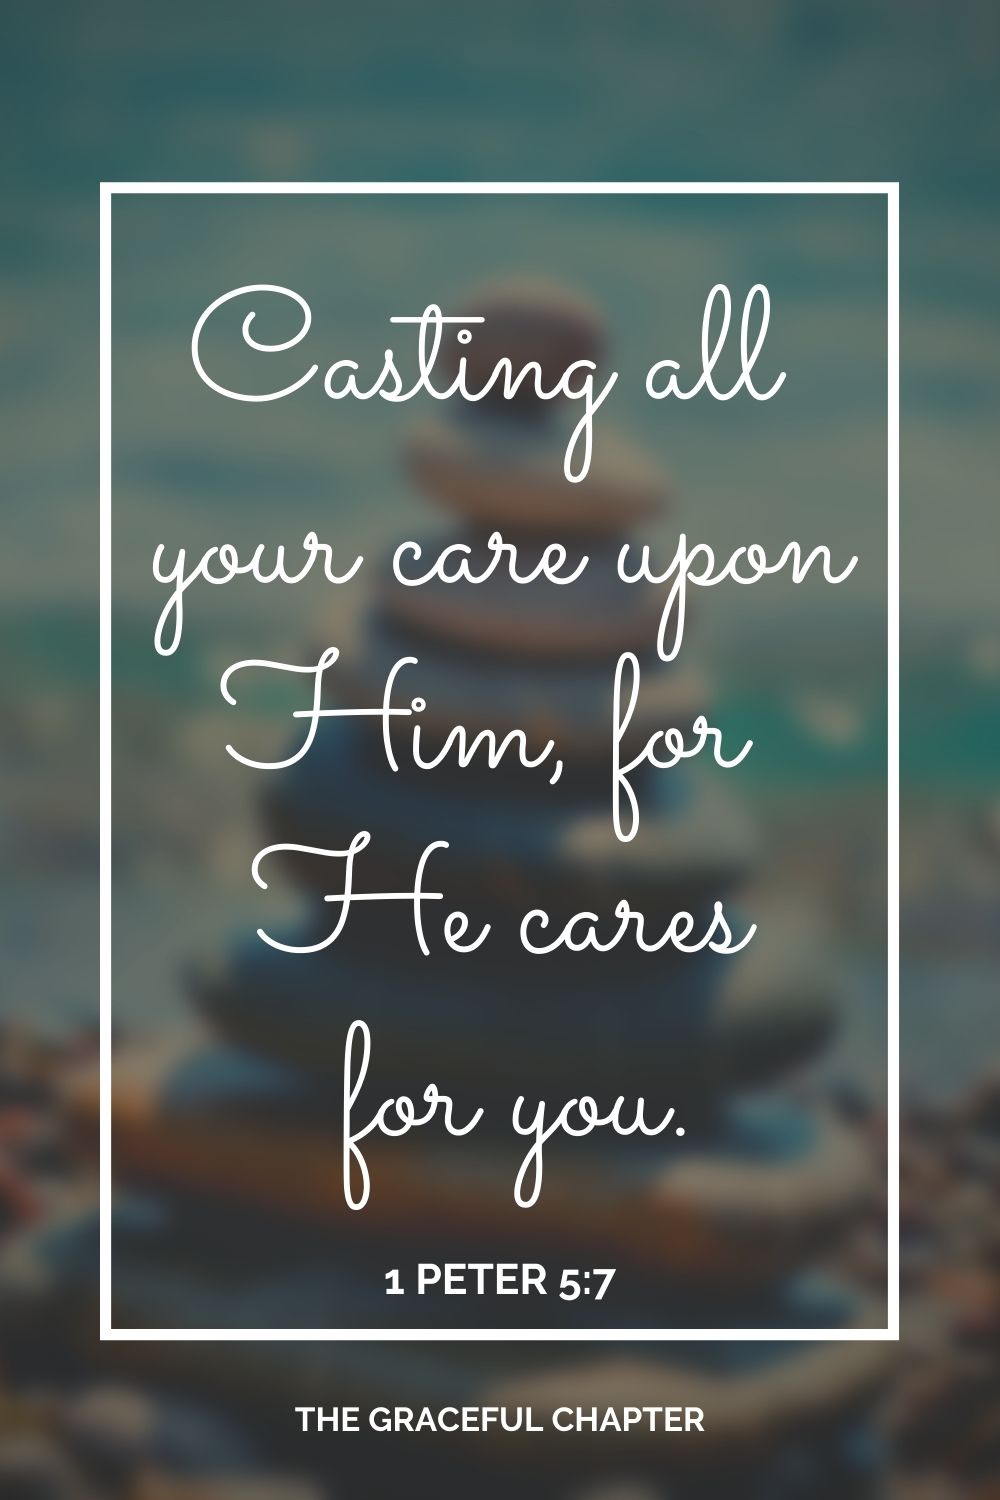 Casting all your care upon Him, for He cares for you. 1 Peter 5:7